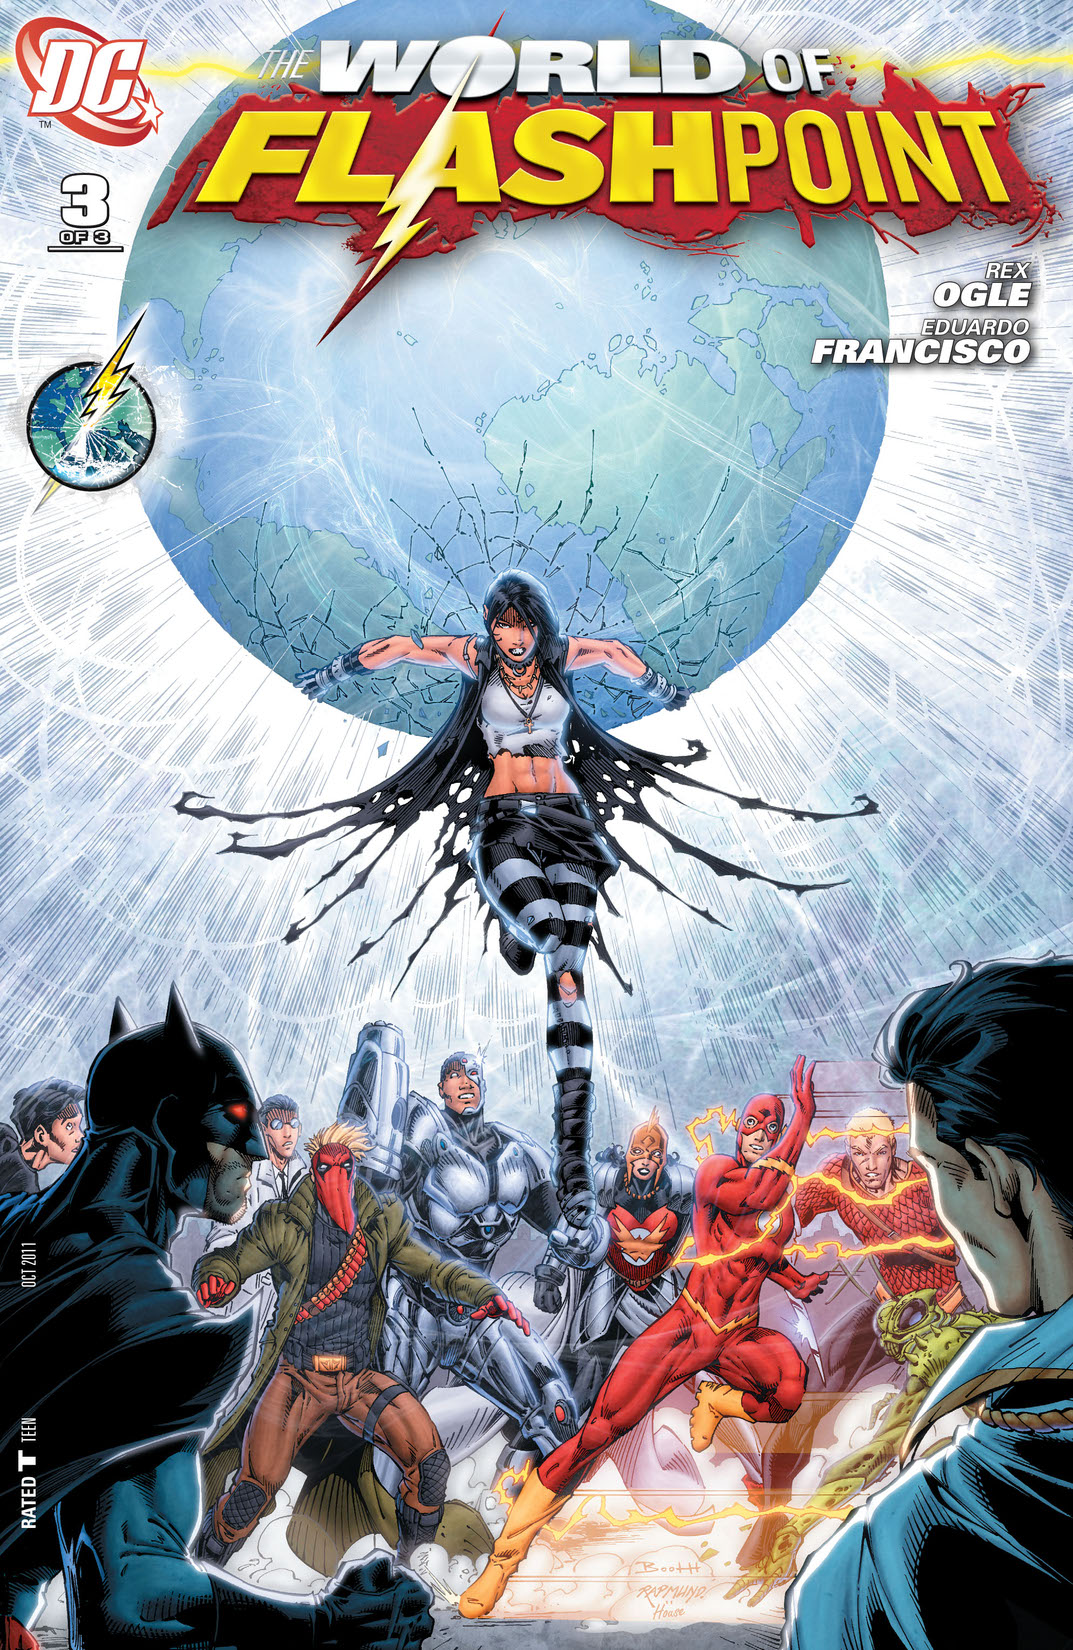 Flashpoint: The World of Flashpoint #3 preview images